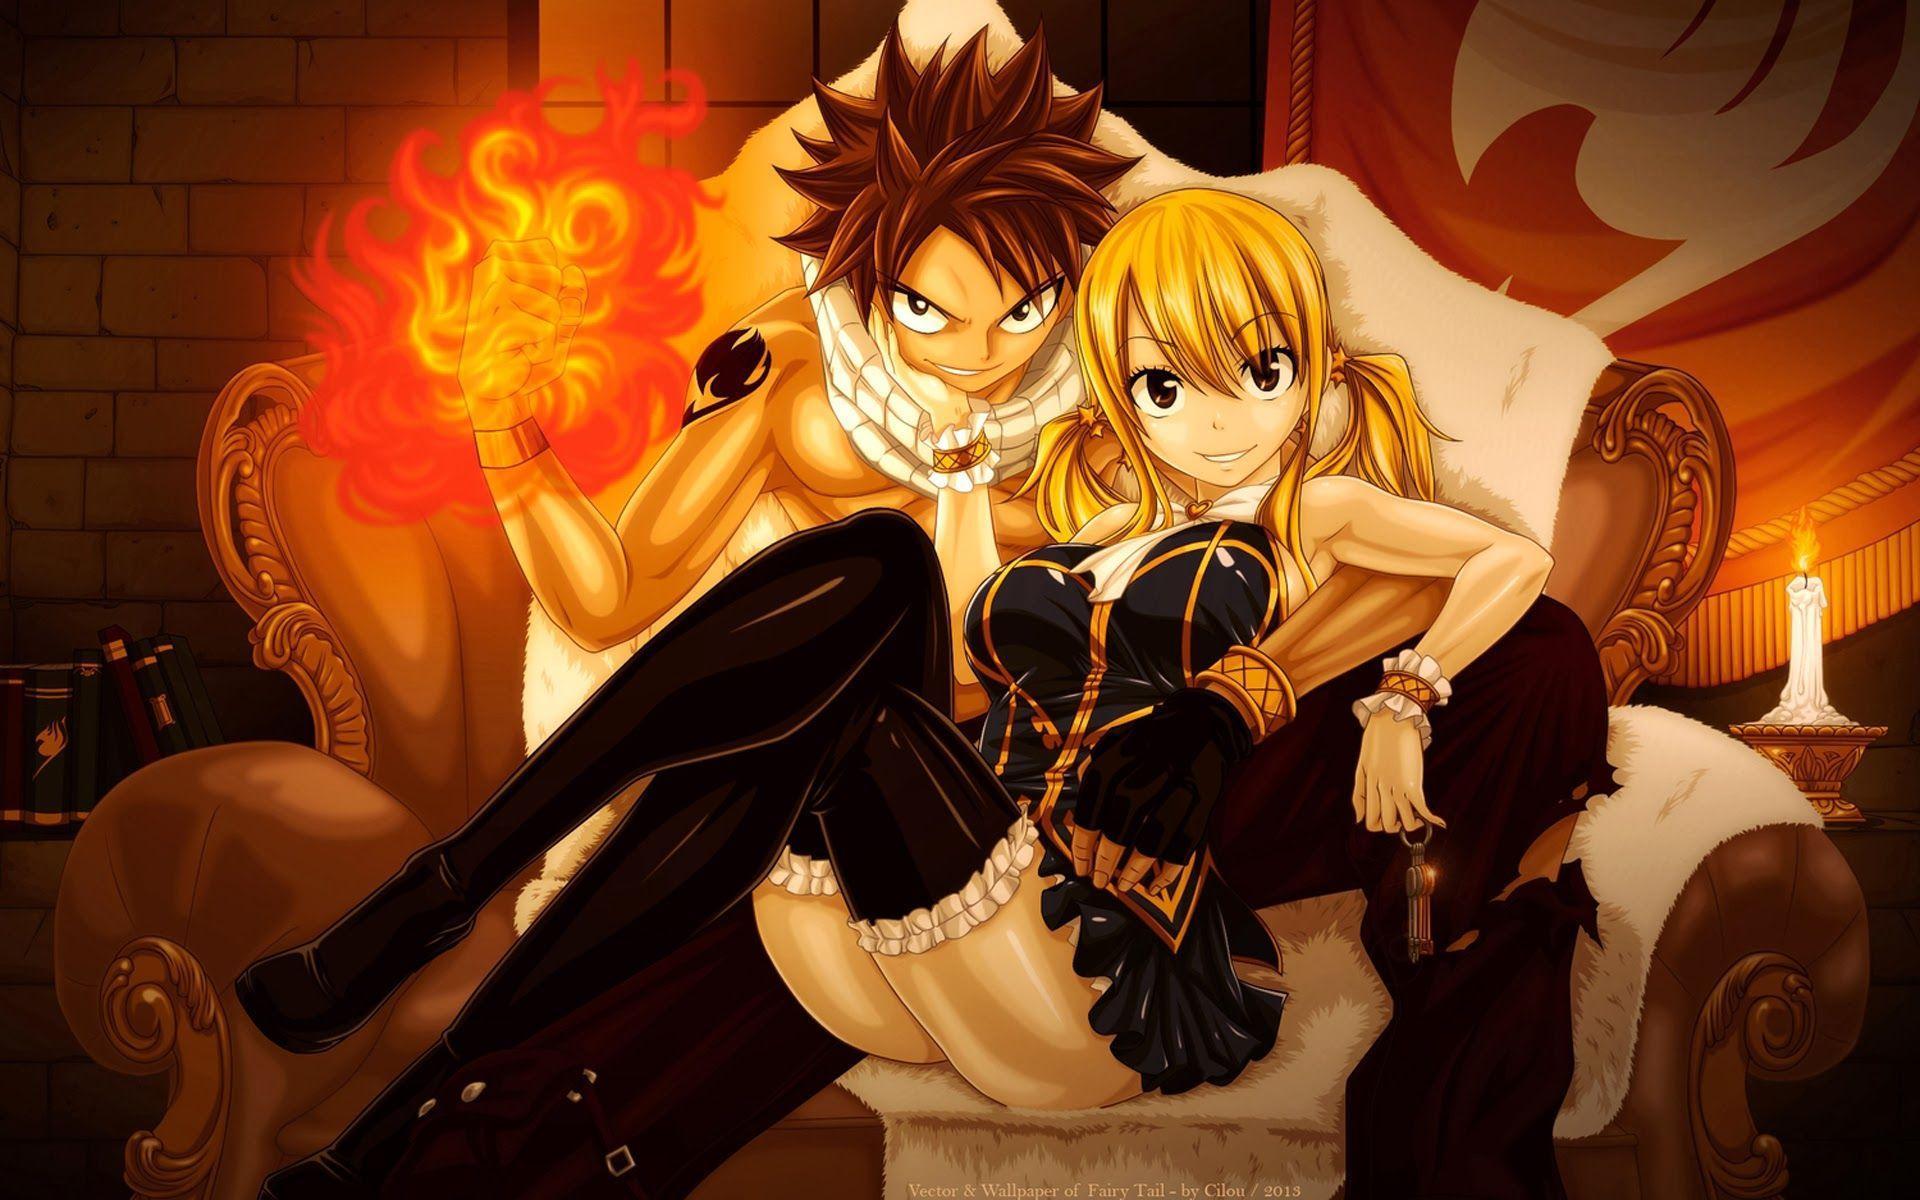 Fairy Tail Background. Wallpaper, Background, Image, Art Photo